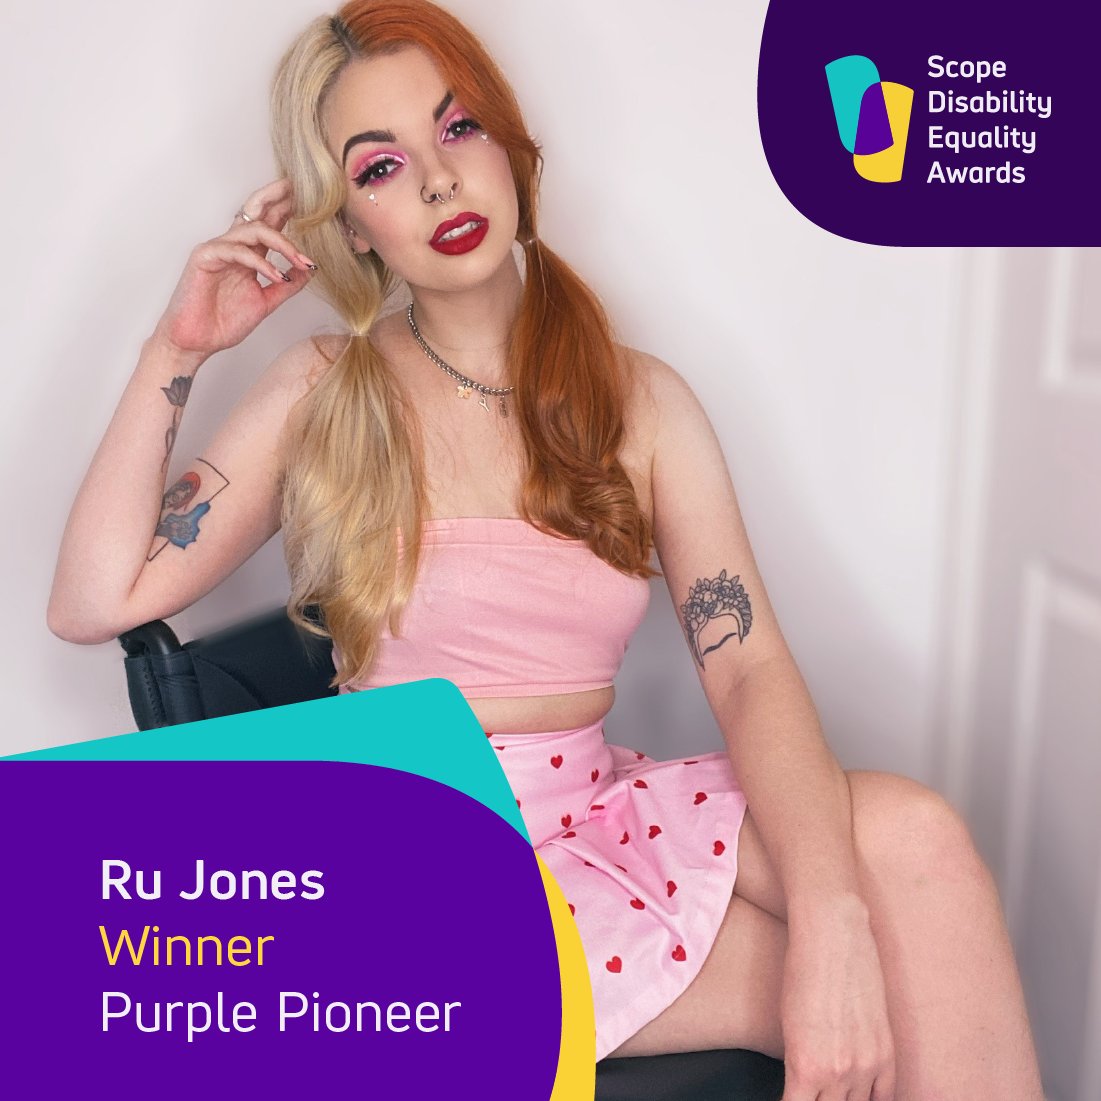 🏆 Ru Jones is our Purple Pioneer! Ru uses their platform to educate and inform others, amplifying disabled voices and creators who might otherwise be overlooked. Ru’s a great example of someone who uplifts the disability community. Great work, @Chr0nicallyCute ✨